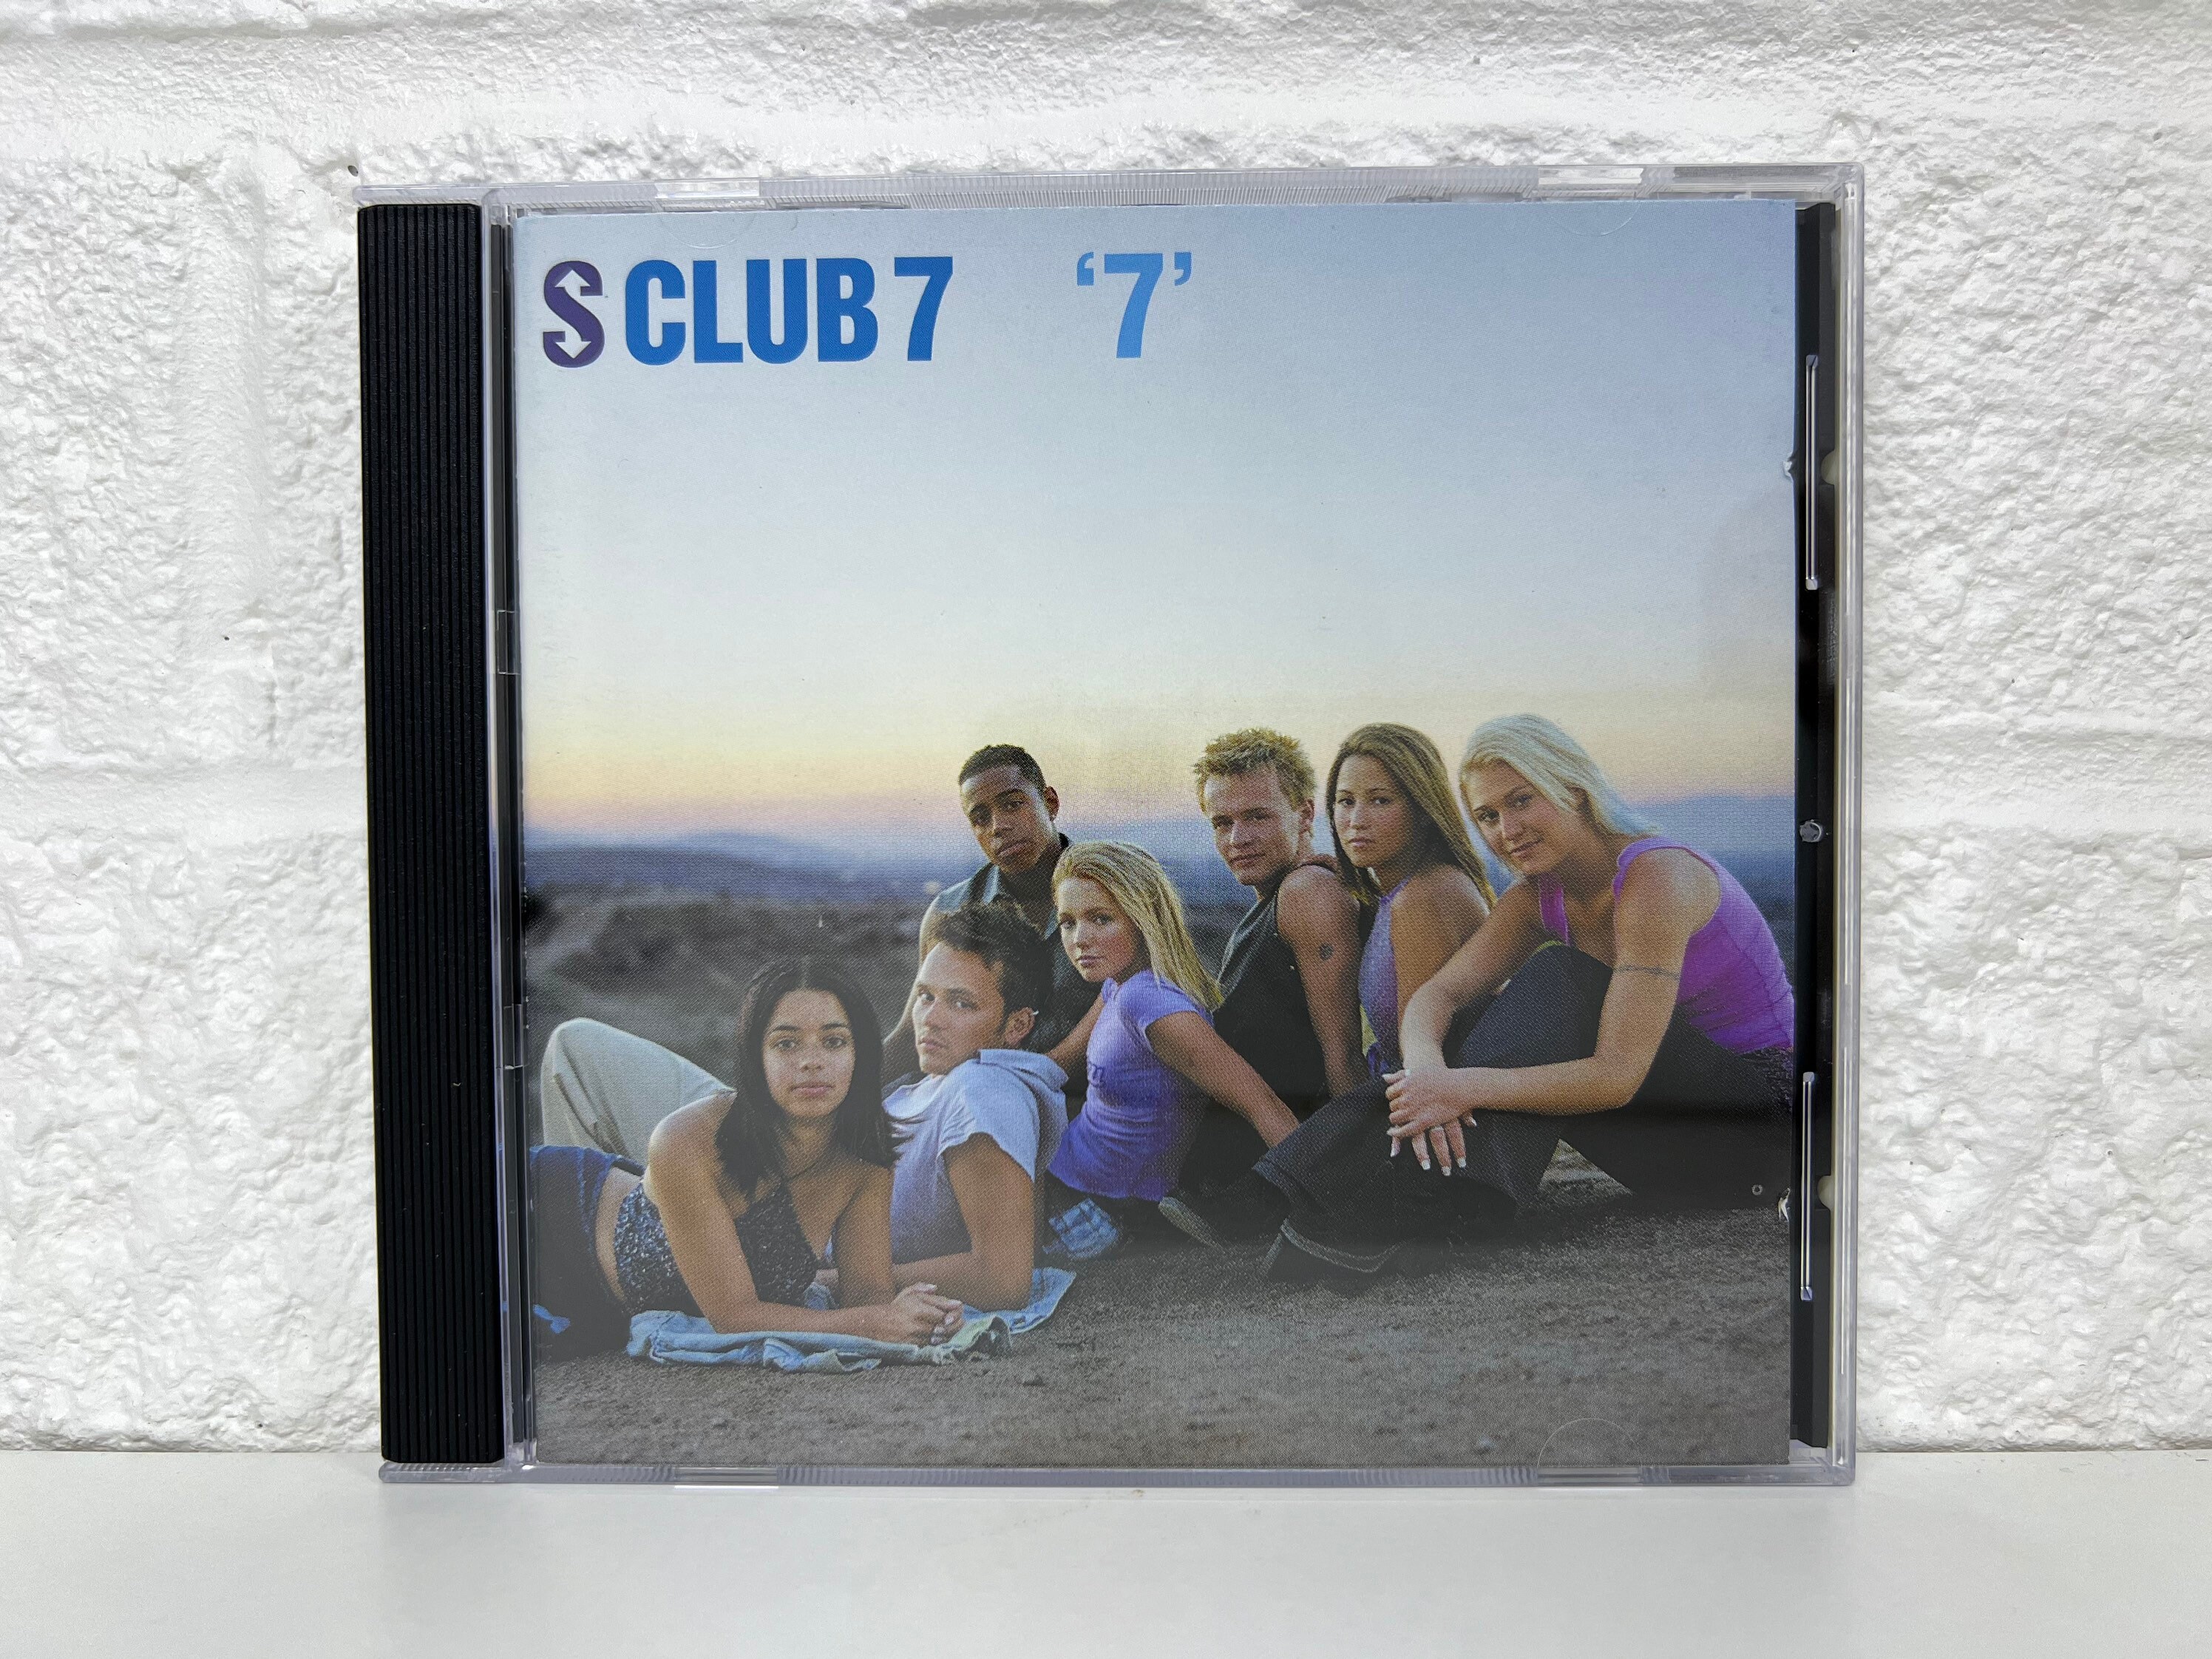 S Club 7 CD Collection Album 7 Genre Pop Gifts Vintage Music - Etsy